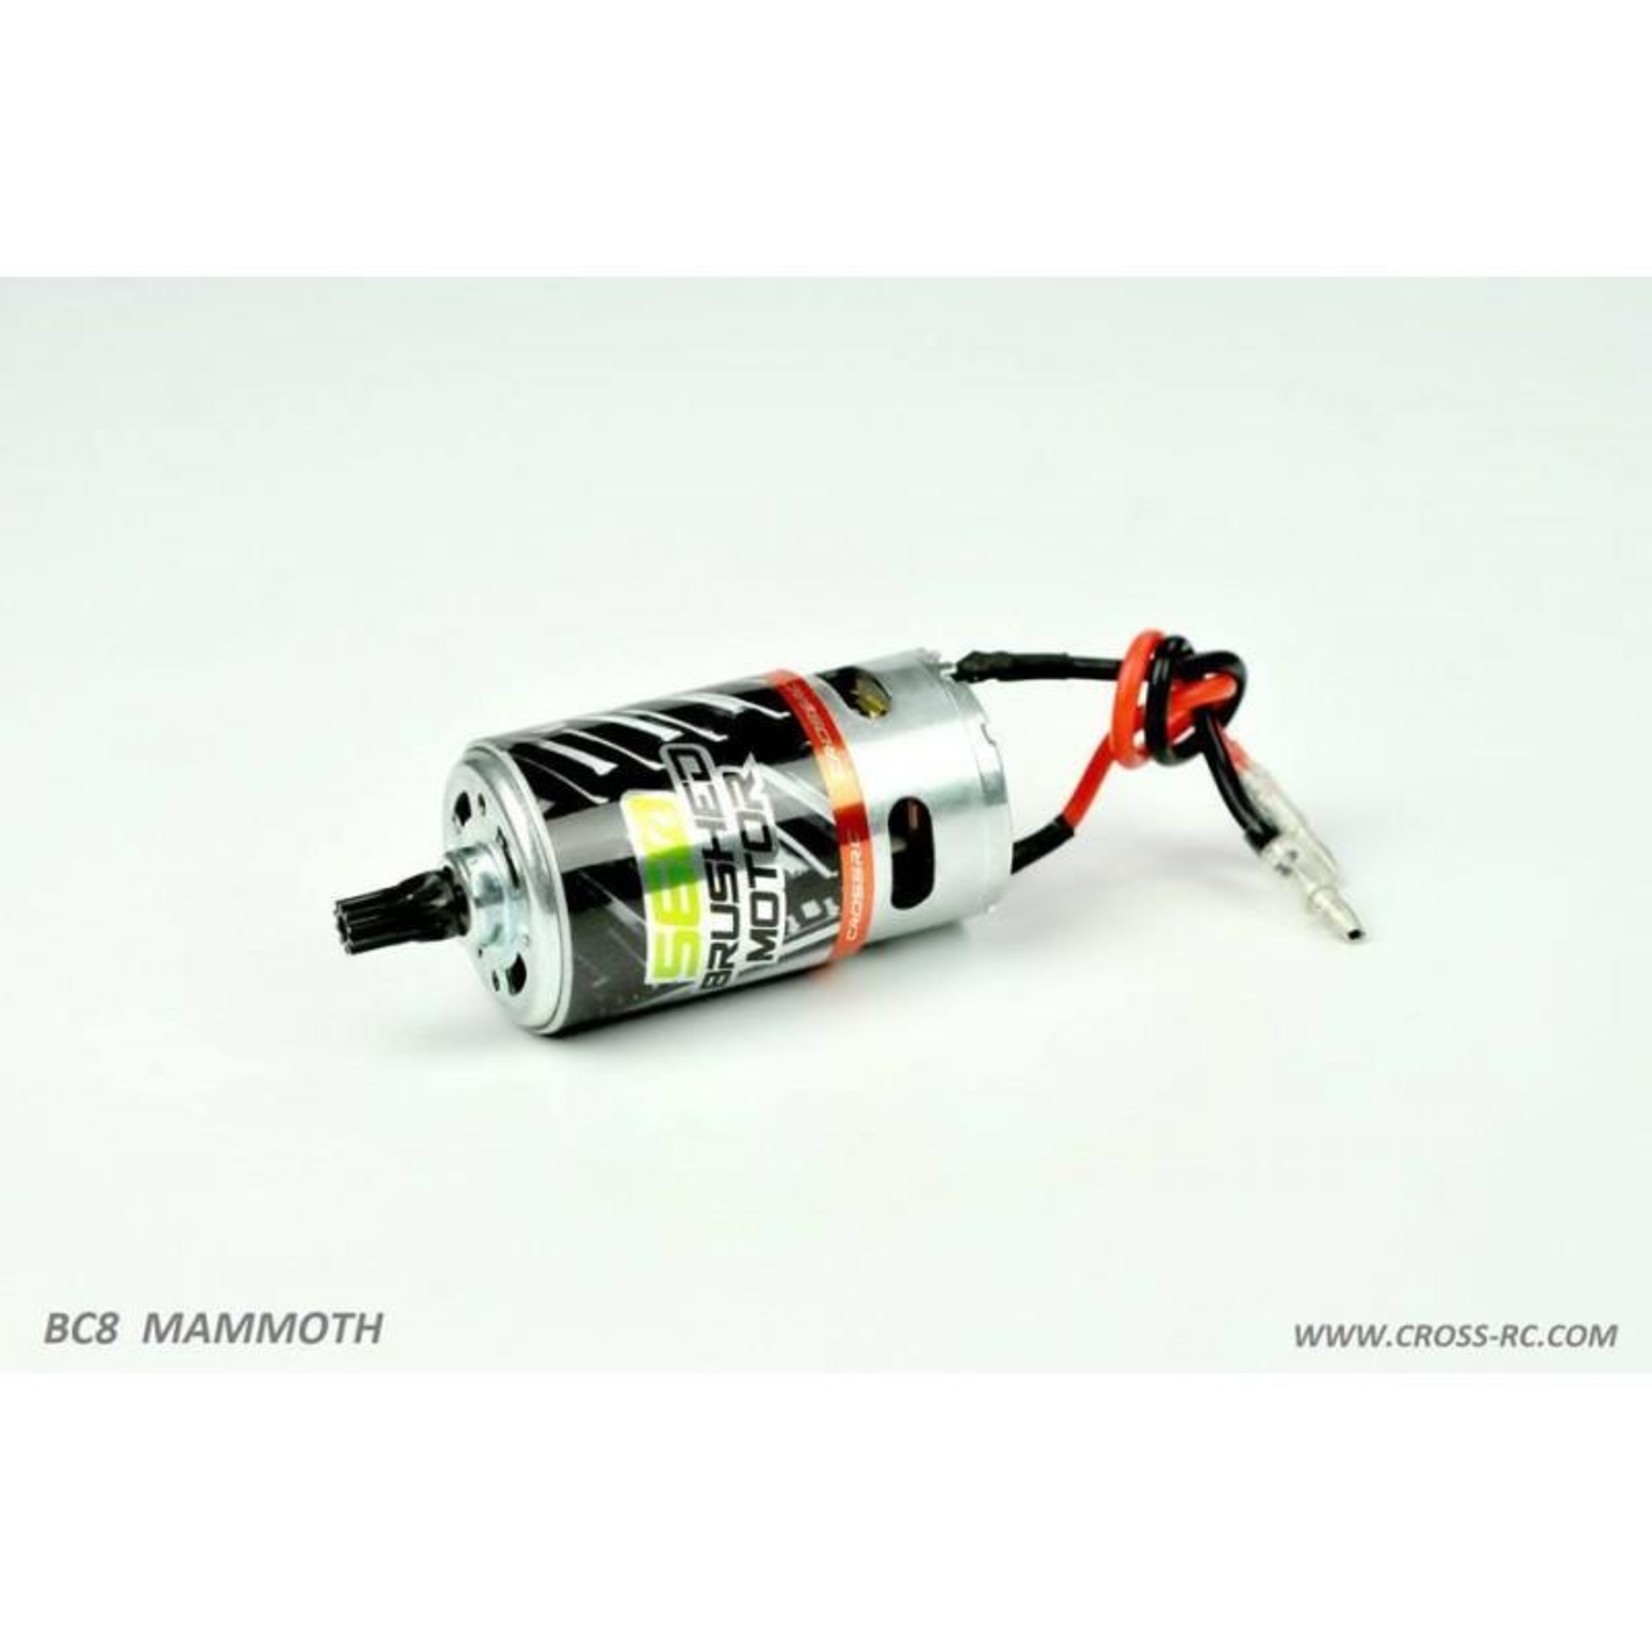 Cross RC 560-size, 38T brushed Motor: BC8